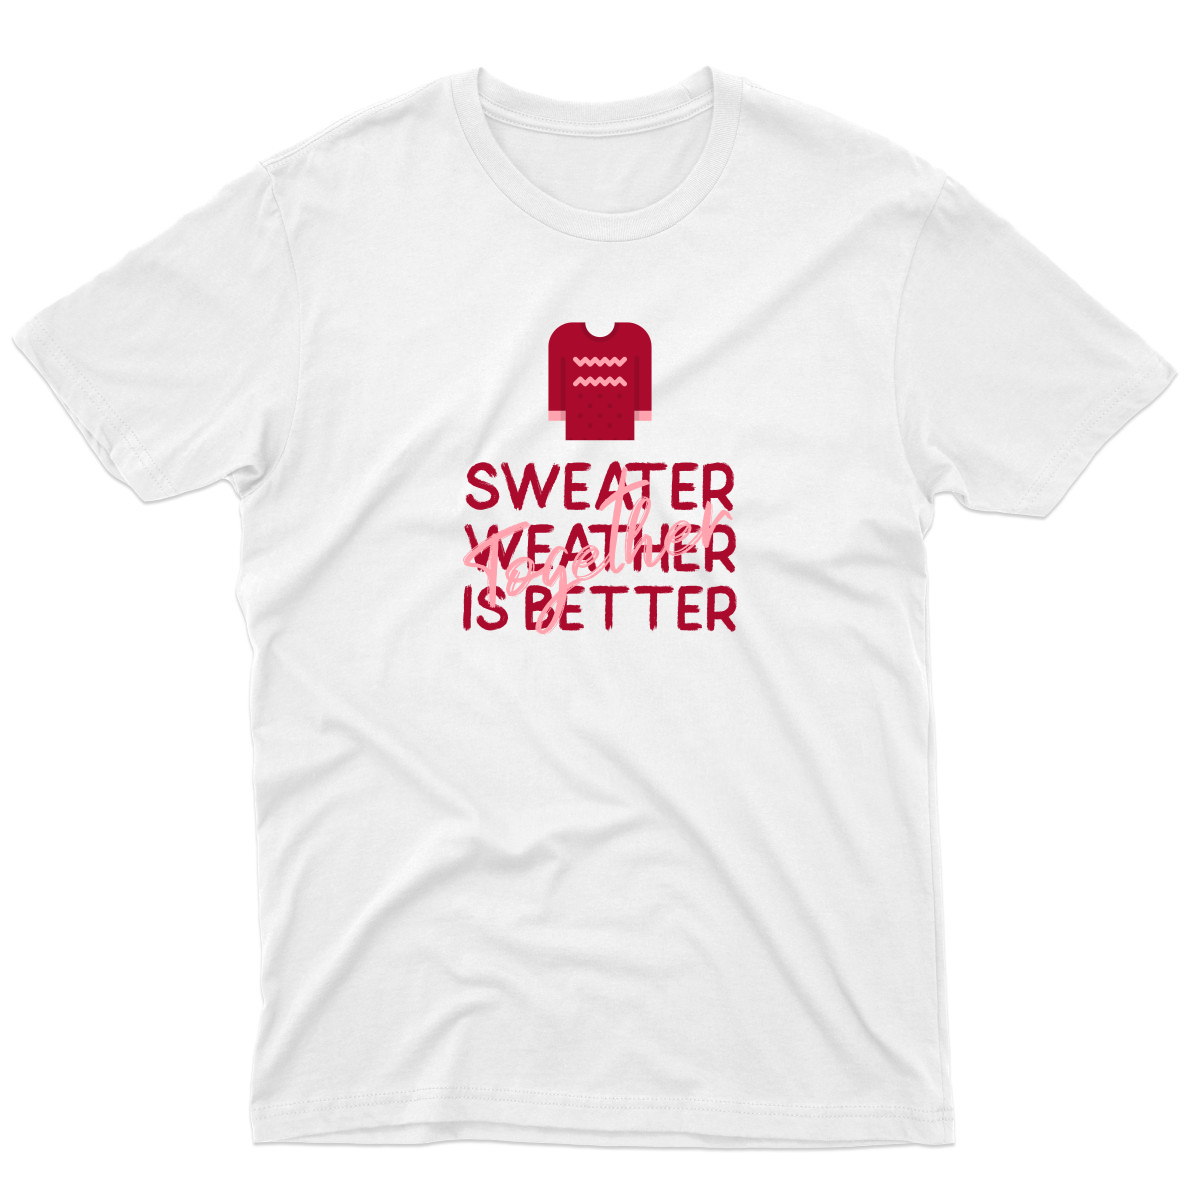 Sweather Weather is Better Together Men's T-shirt | White